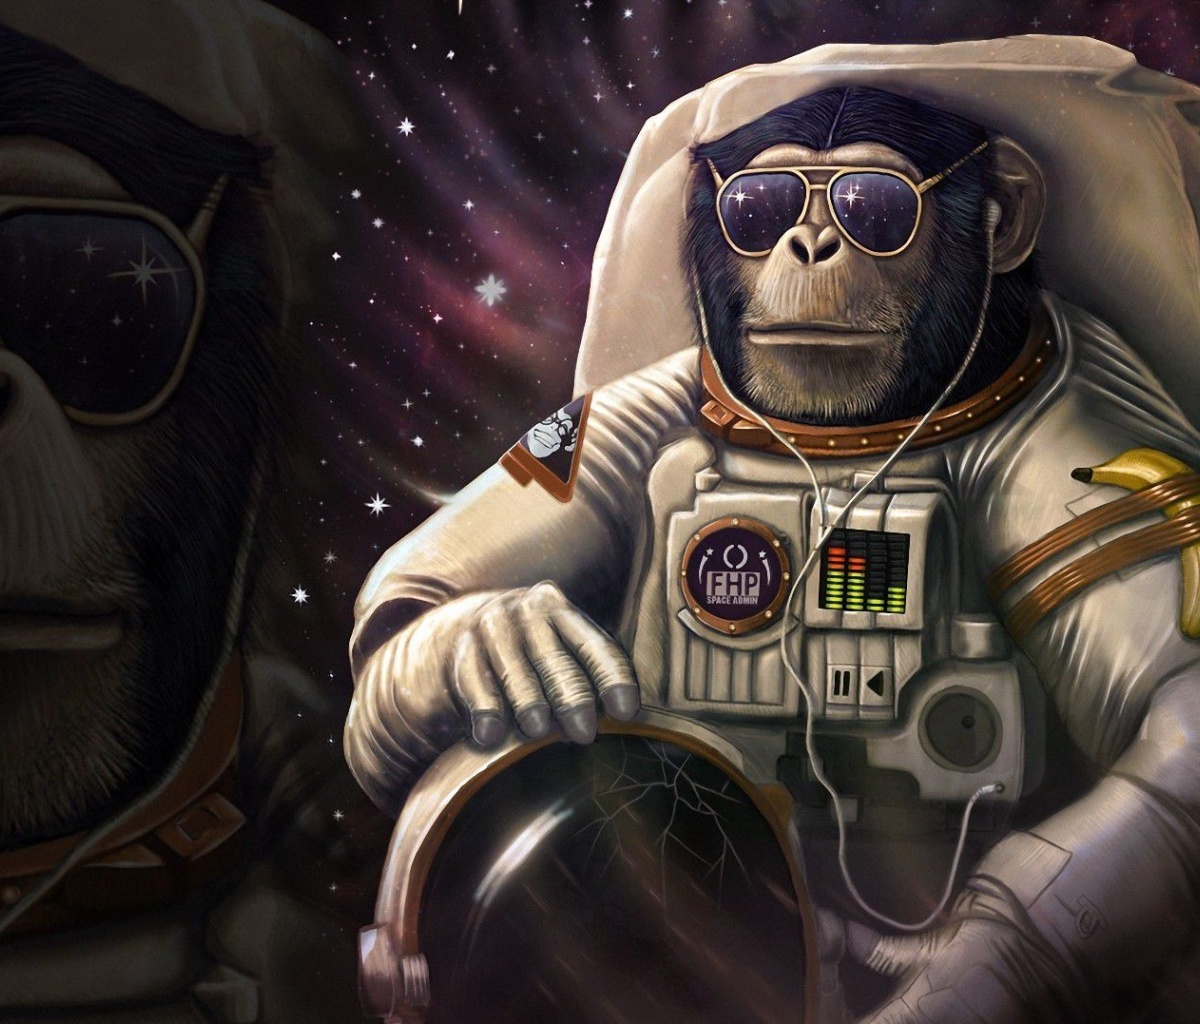 Monkeys and apes in space screenshot #1 1200x1024